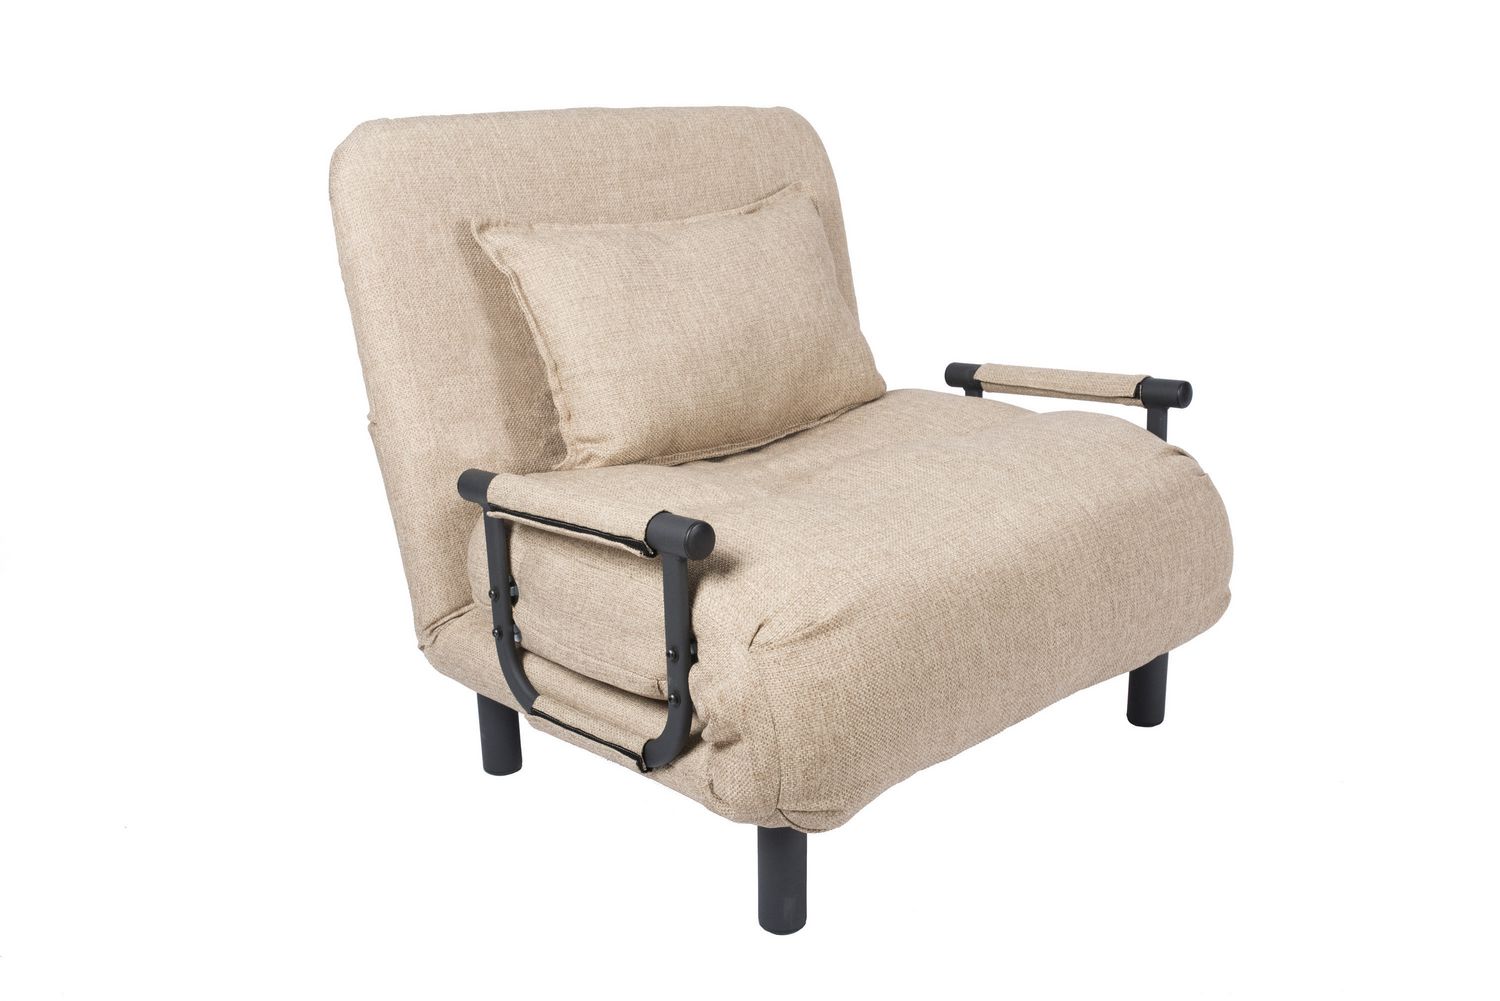 New Chair Bed Walmart Canada for Living room